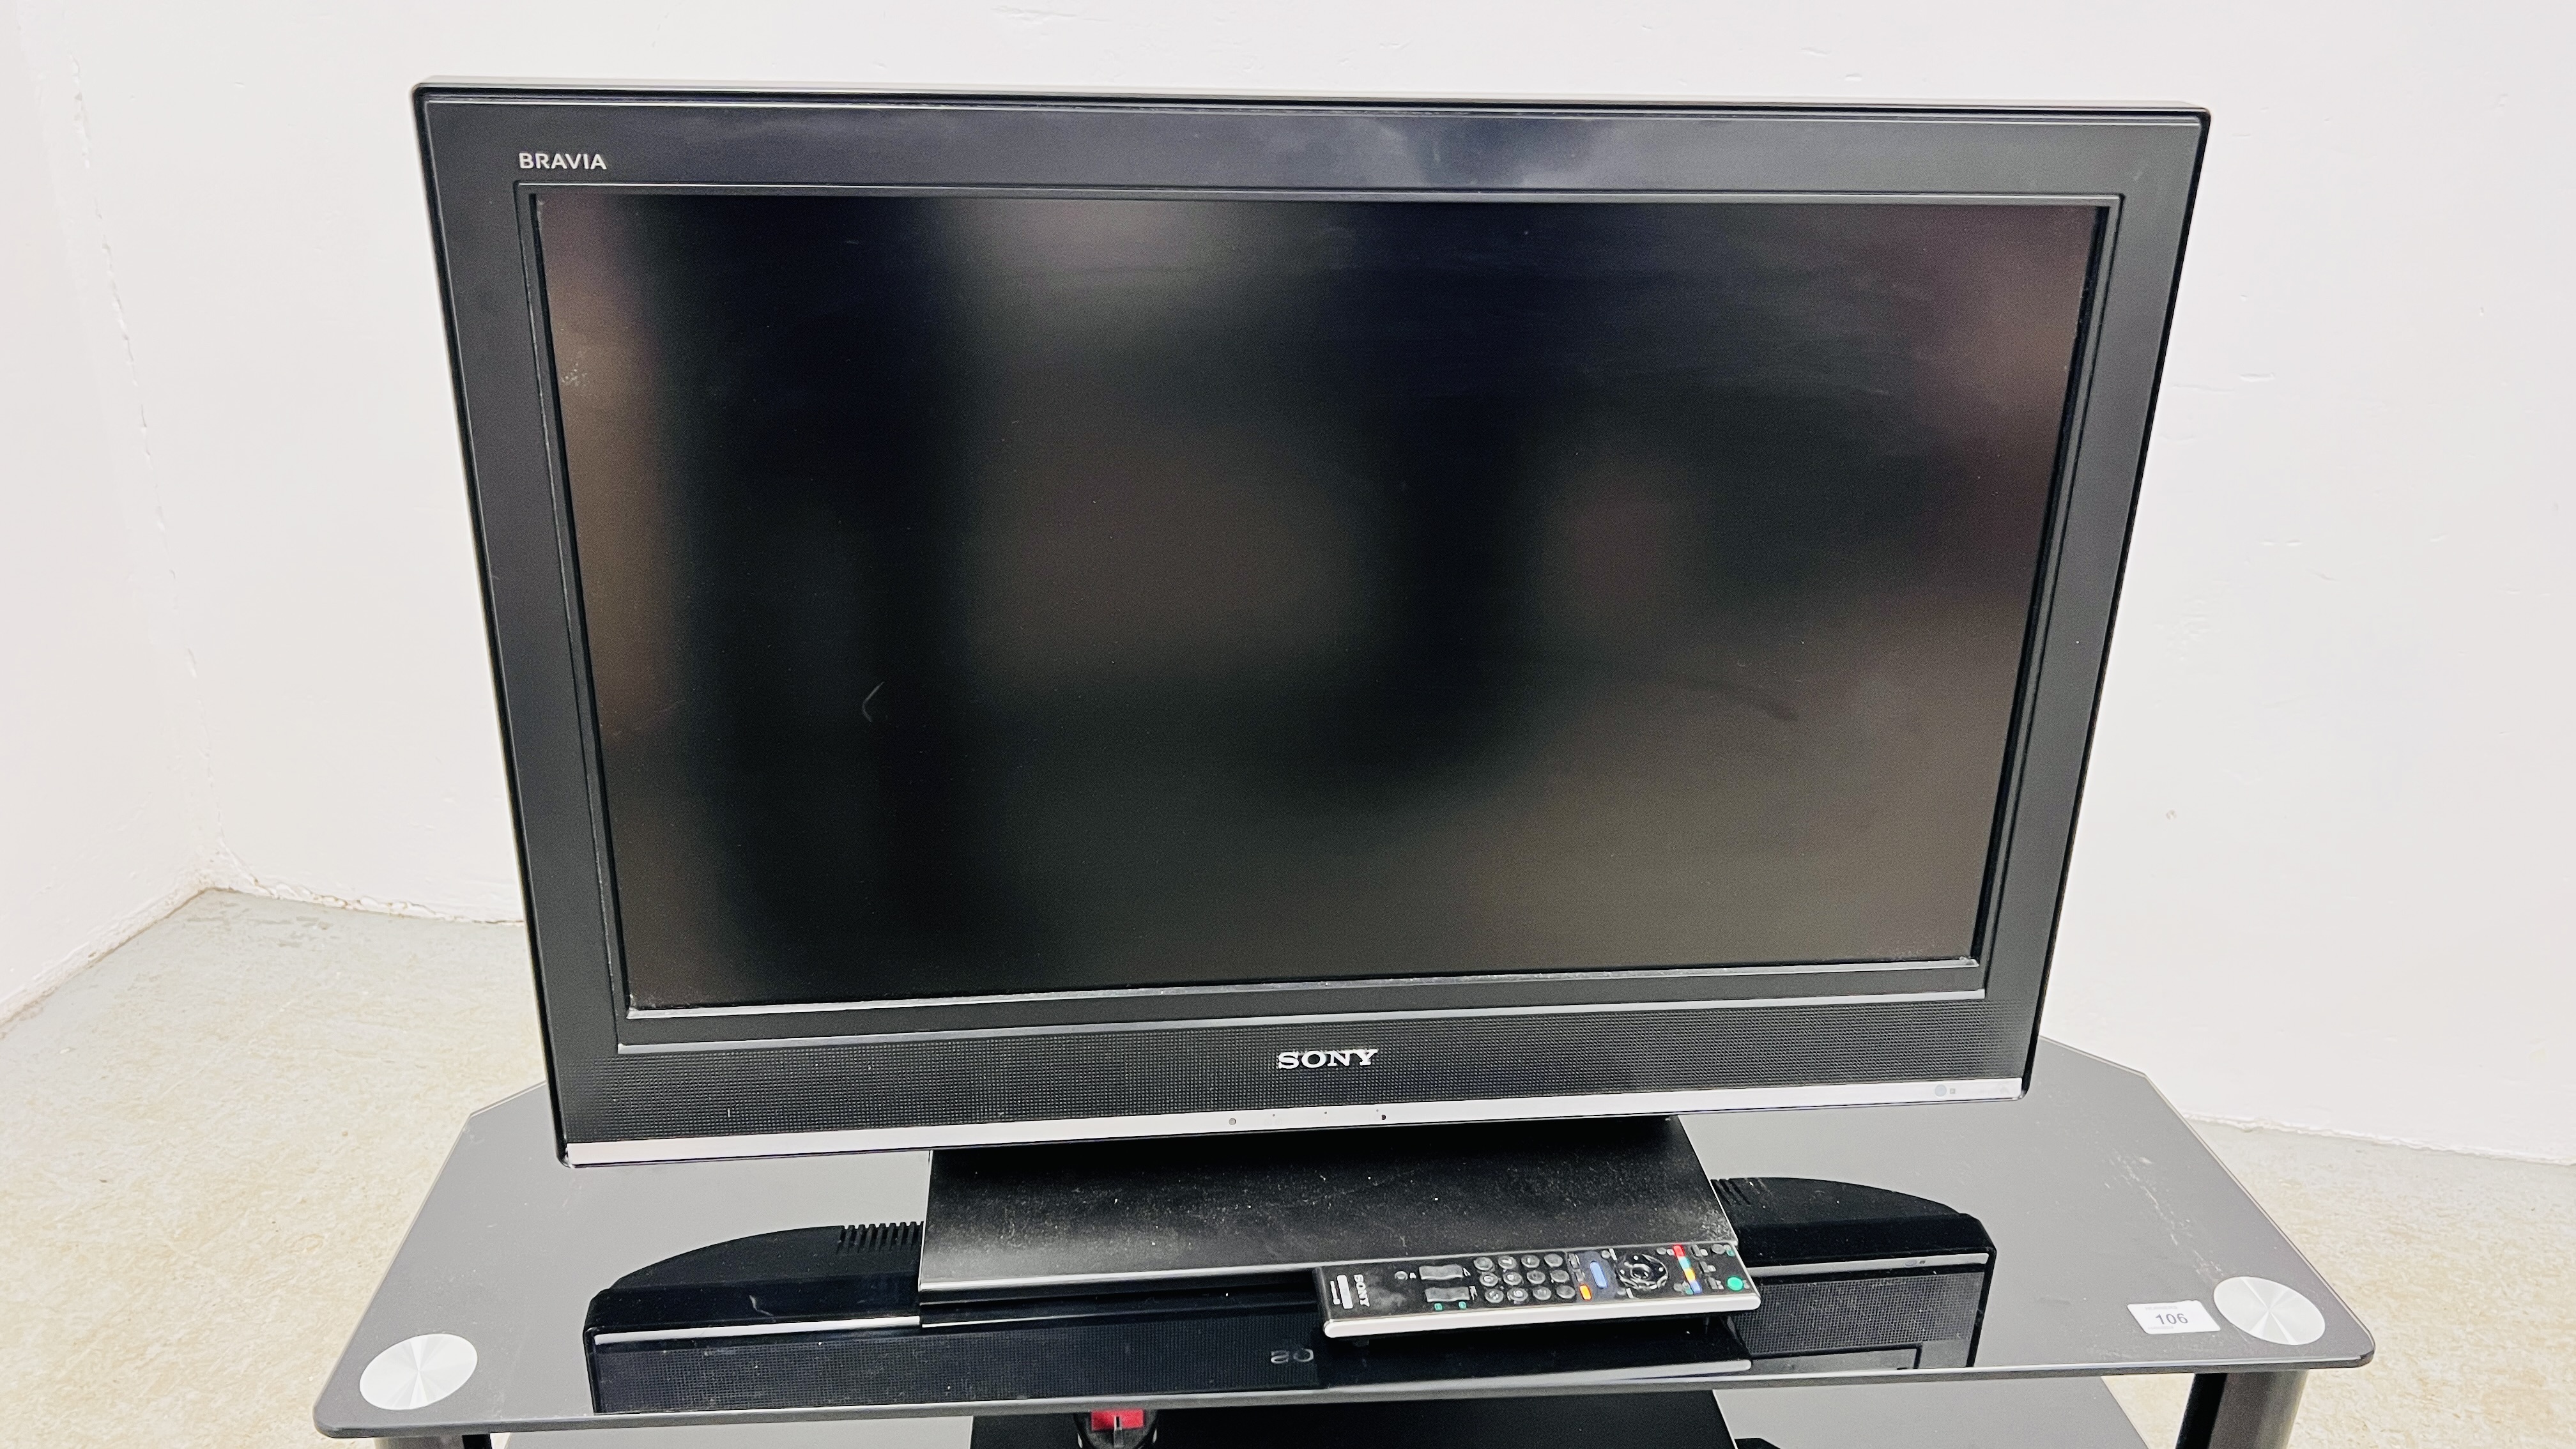 SONY BRAVIA 32 INCH TELEVISION COMPLETE WITH REMOTE AND GLASS STAND PLUS SONY HARD DRIVE RECORDER - - Image 2 of 3